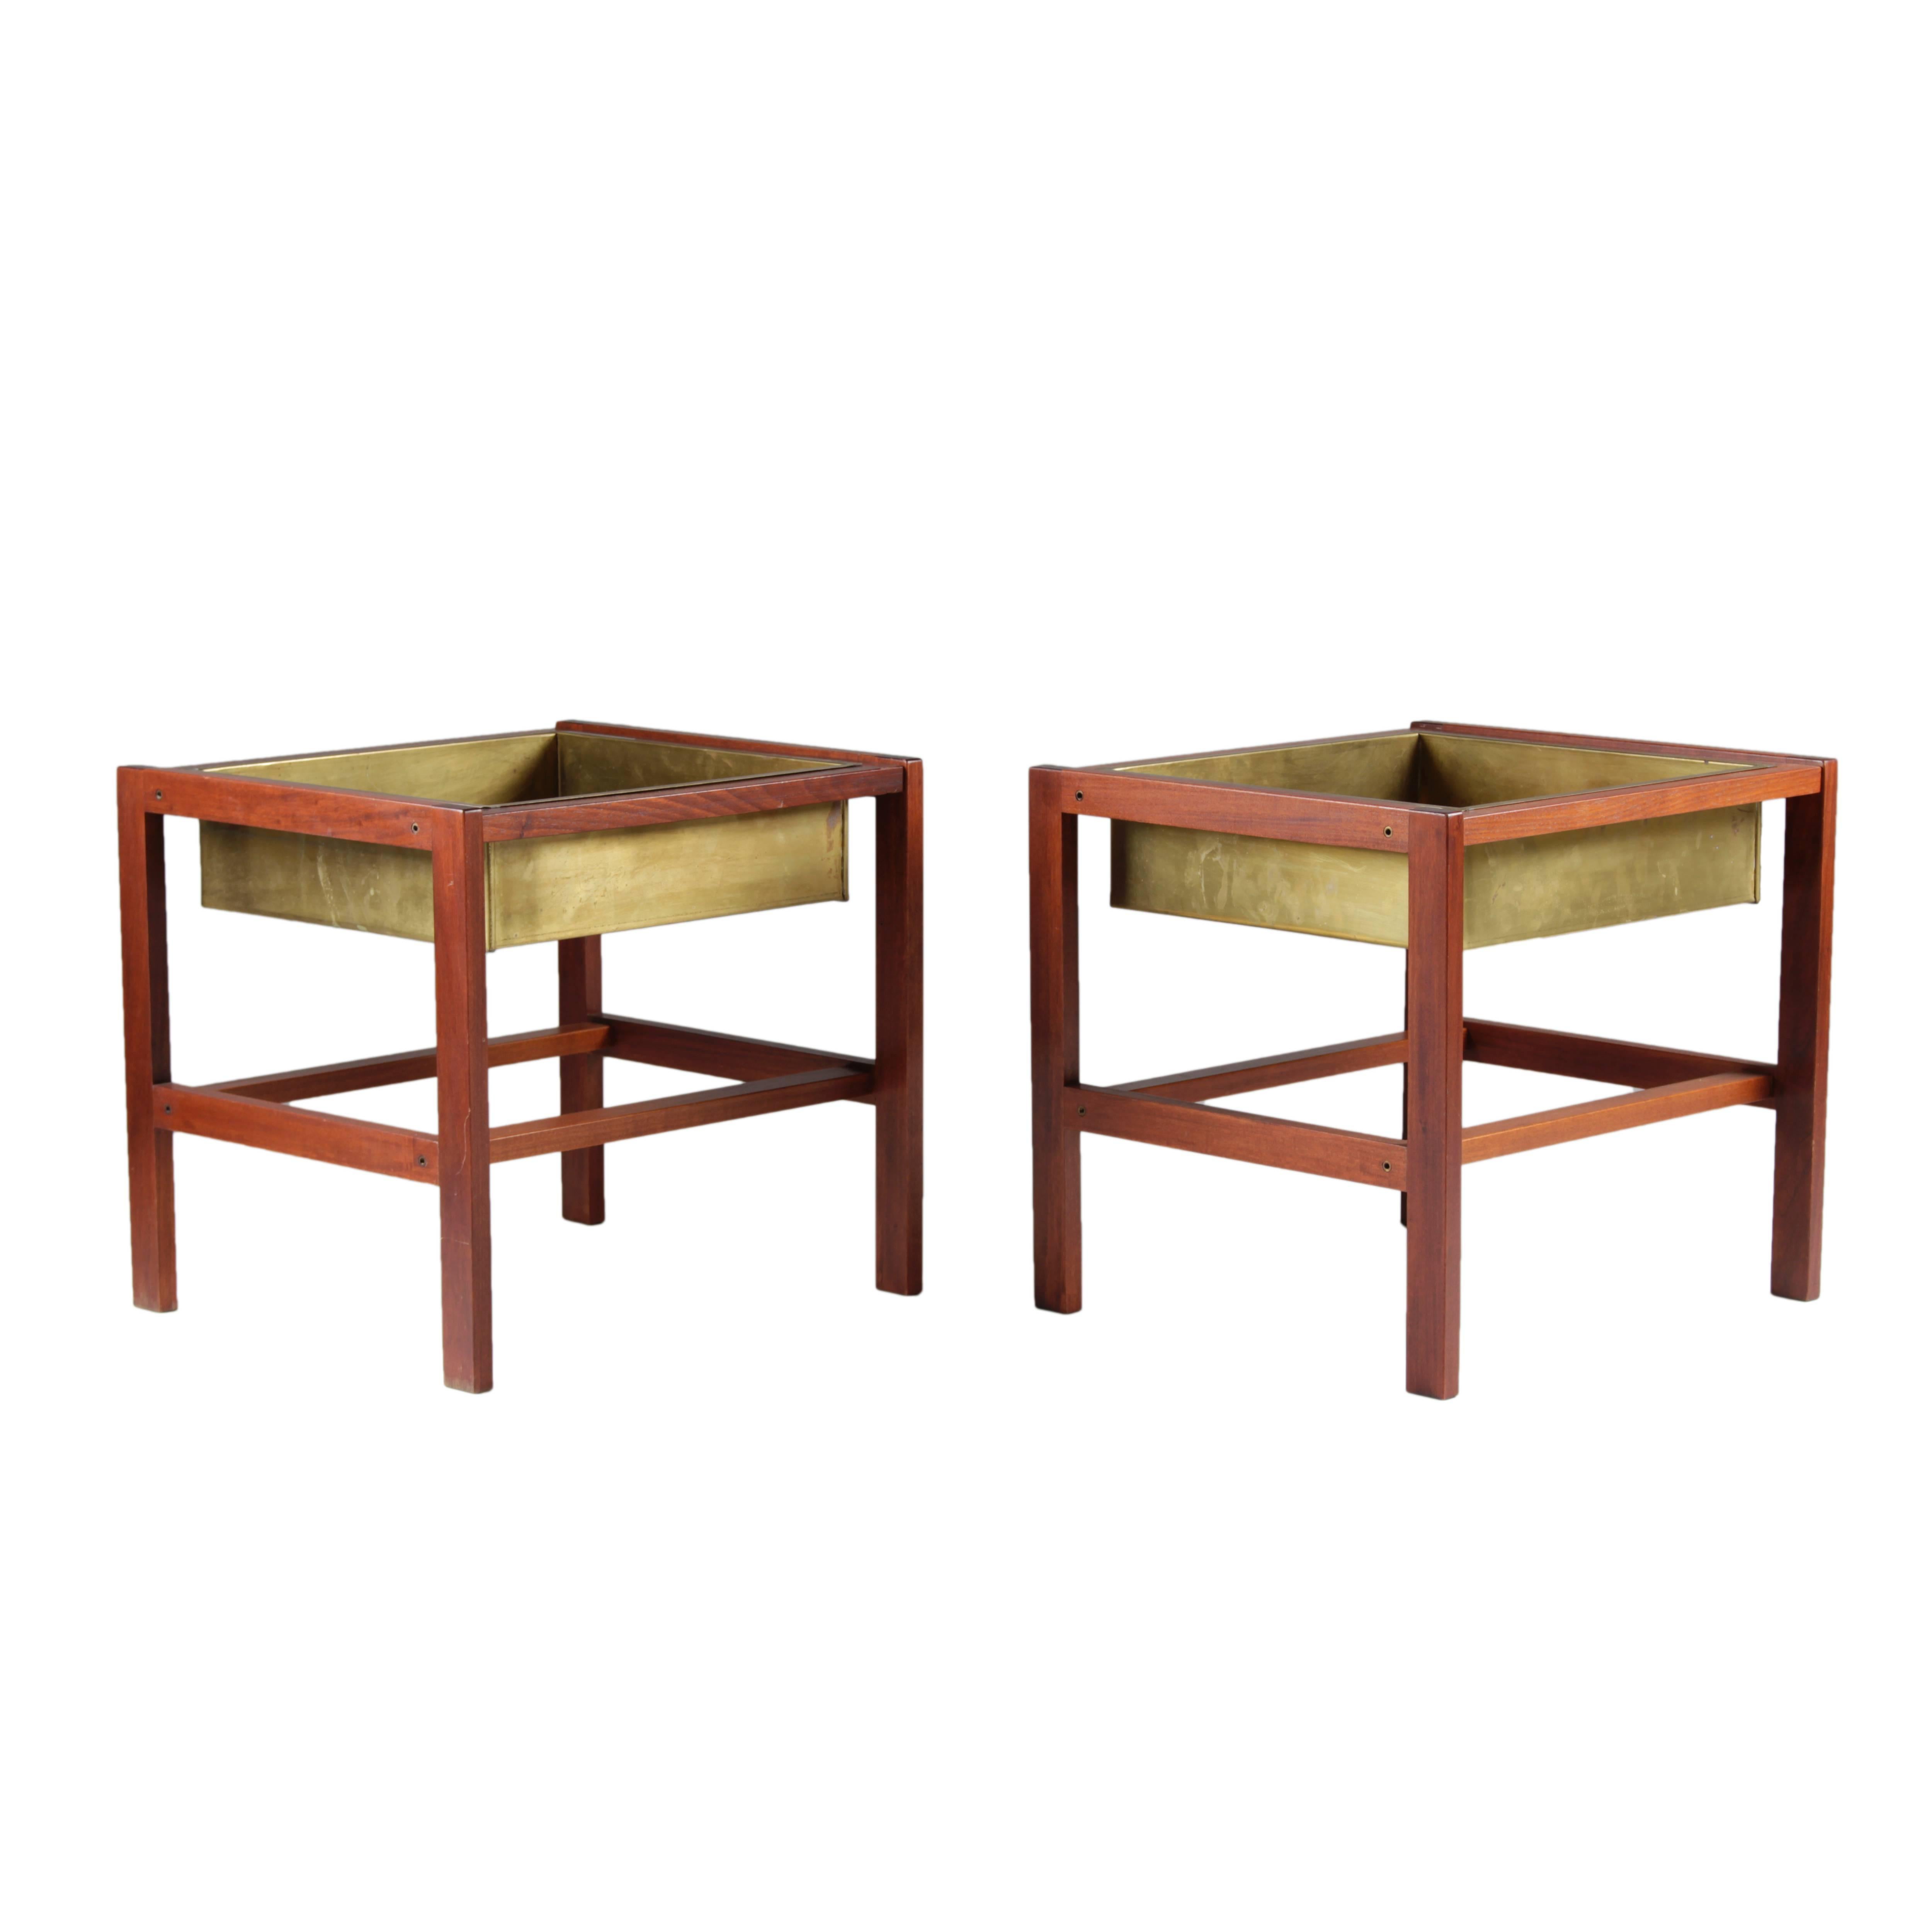 Pair of Flower Tables in Teak and Brass